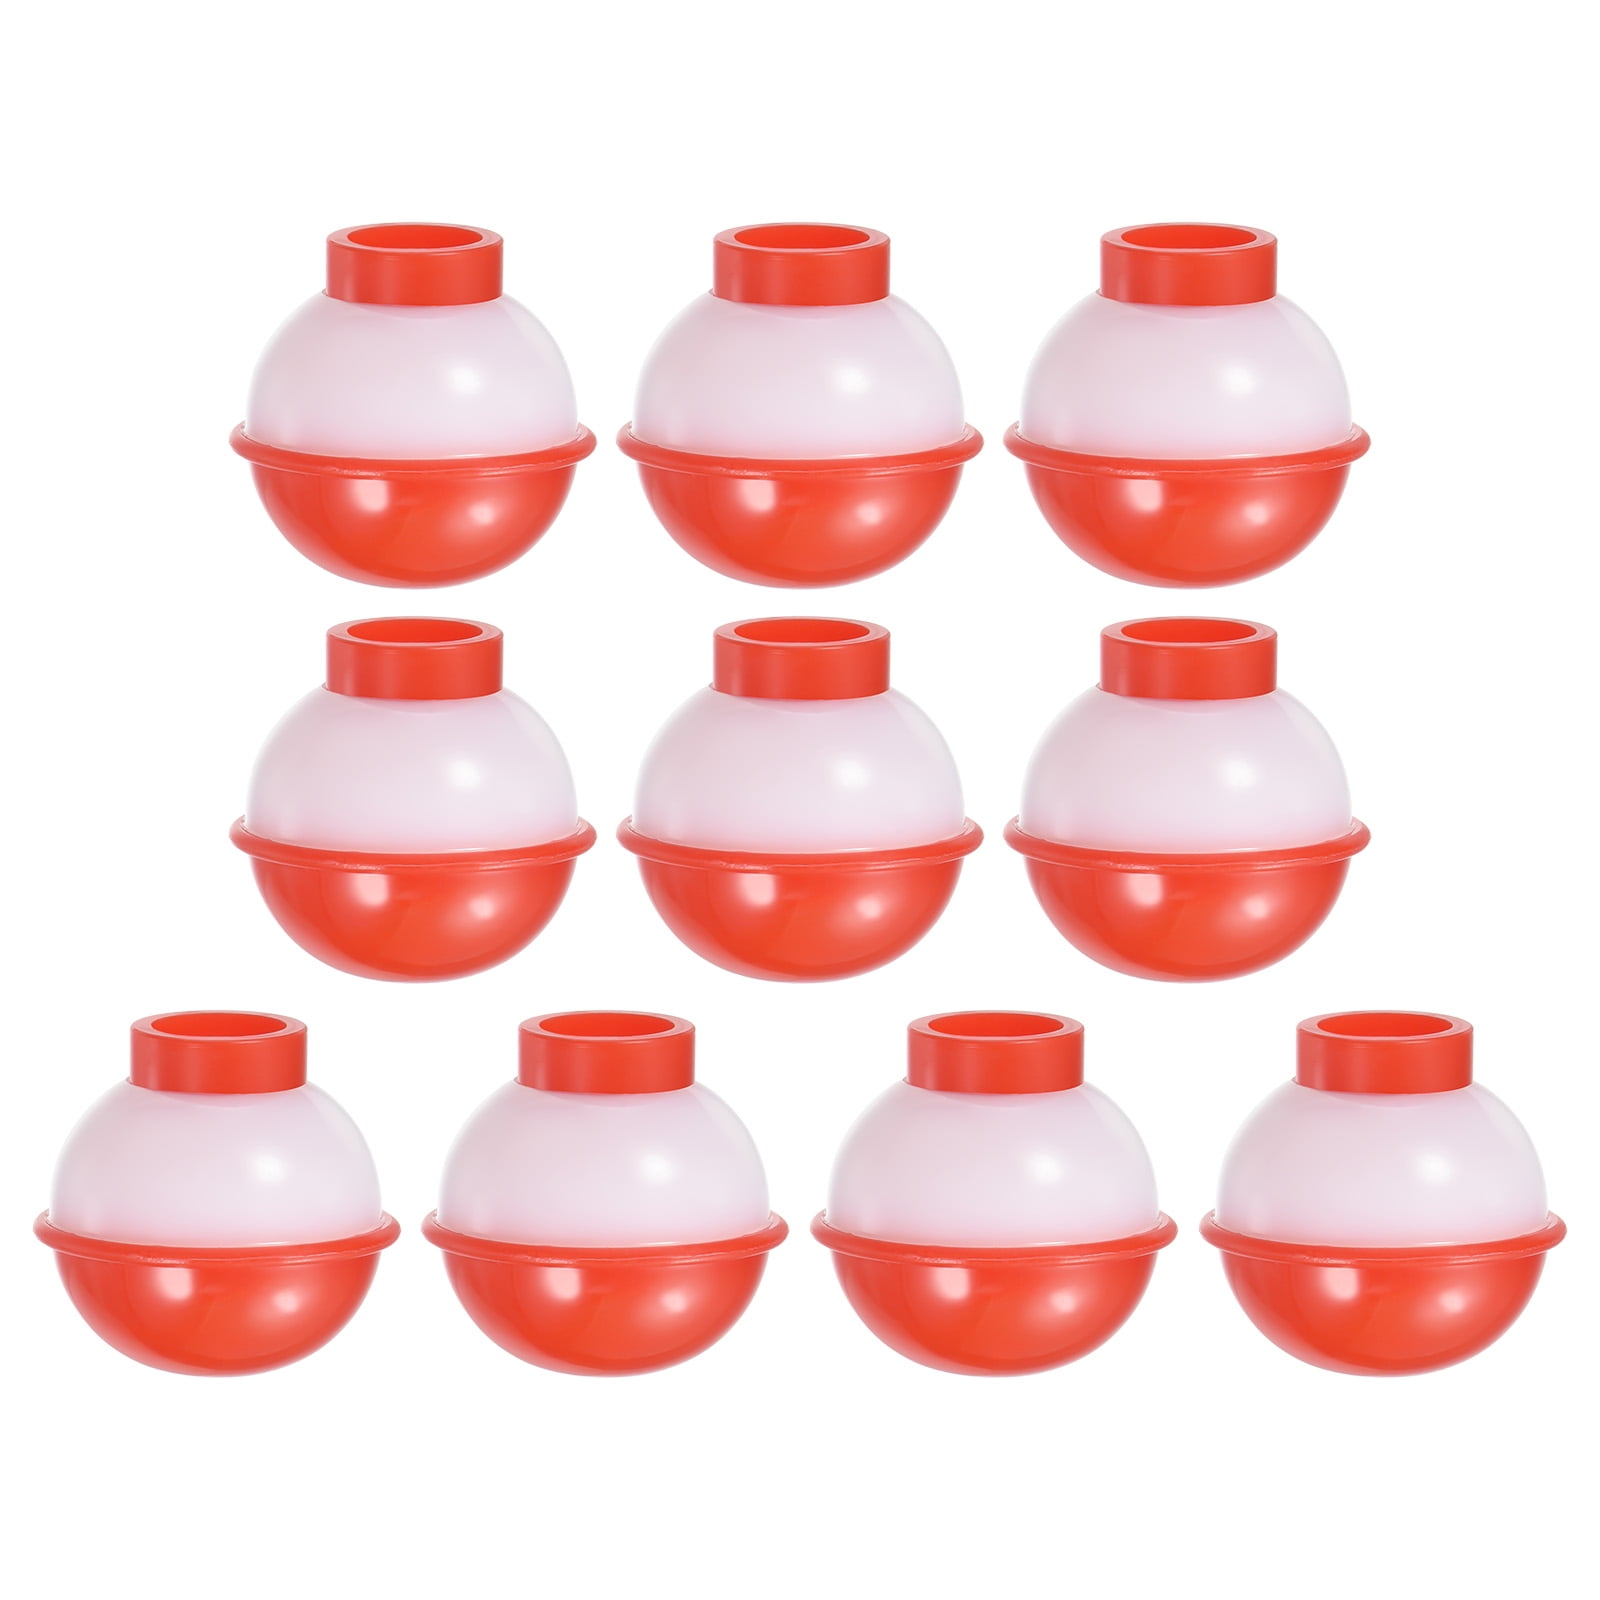 Uxcell 0.75 inch Fishing Bobbers, Plastic Push Button Round Fishing Float, Red and White 20 Pack